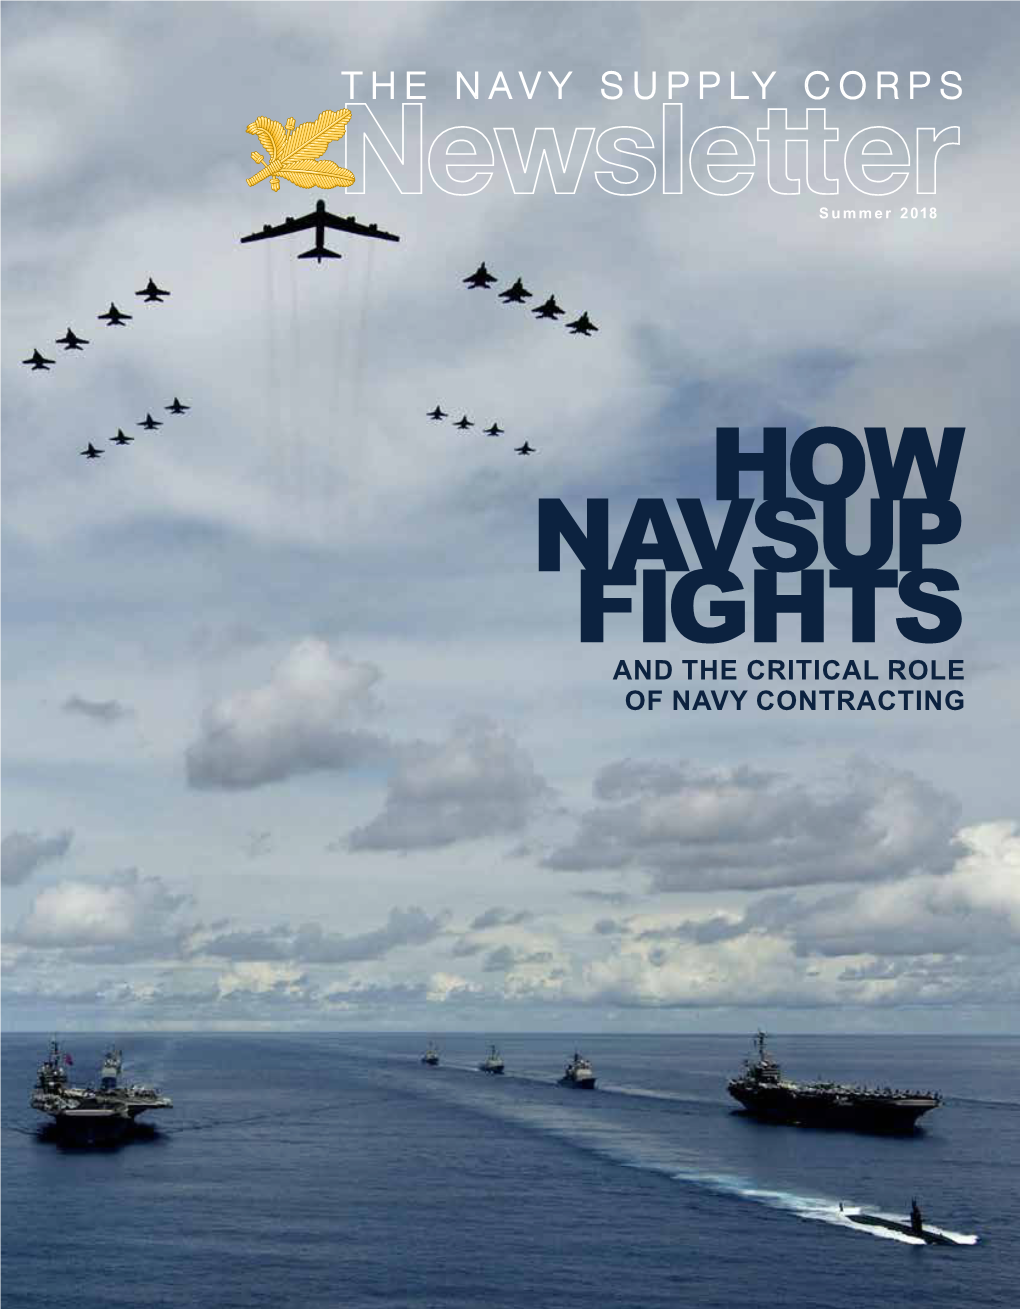 HOW NAVSUP FIGHTS and the Critical Role of Navy Contracting a Message from the Chief of Supply Corps